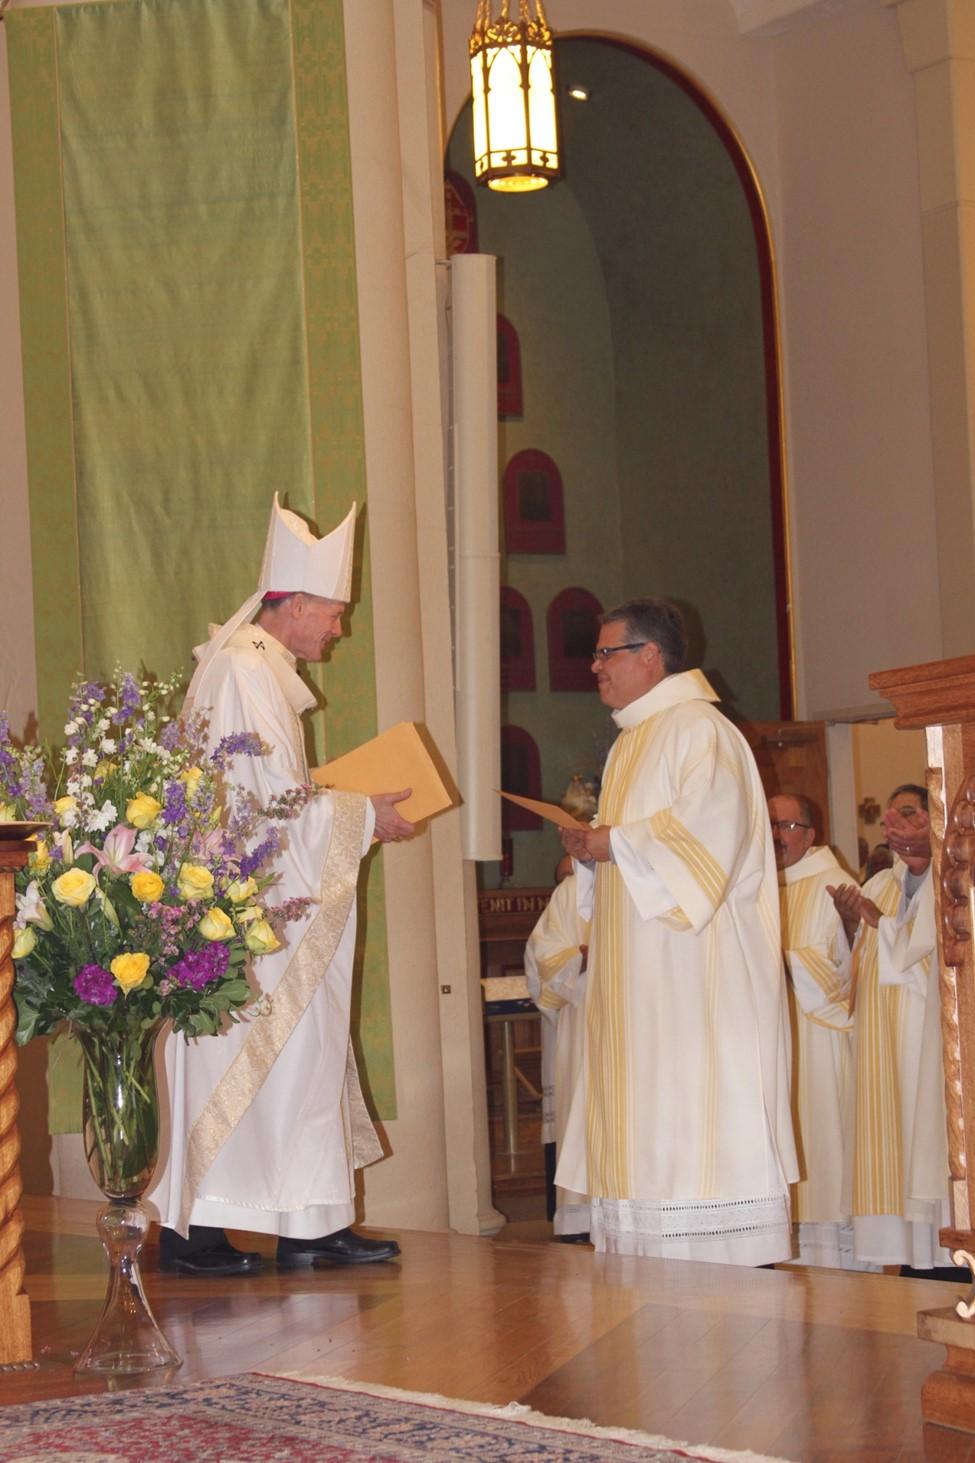 El Diácono; A Newsletter for the Deacons of the Archdiocese of Santa Fe Page 5 The Archbishop places the Book